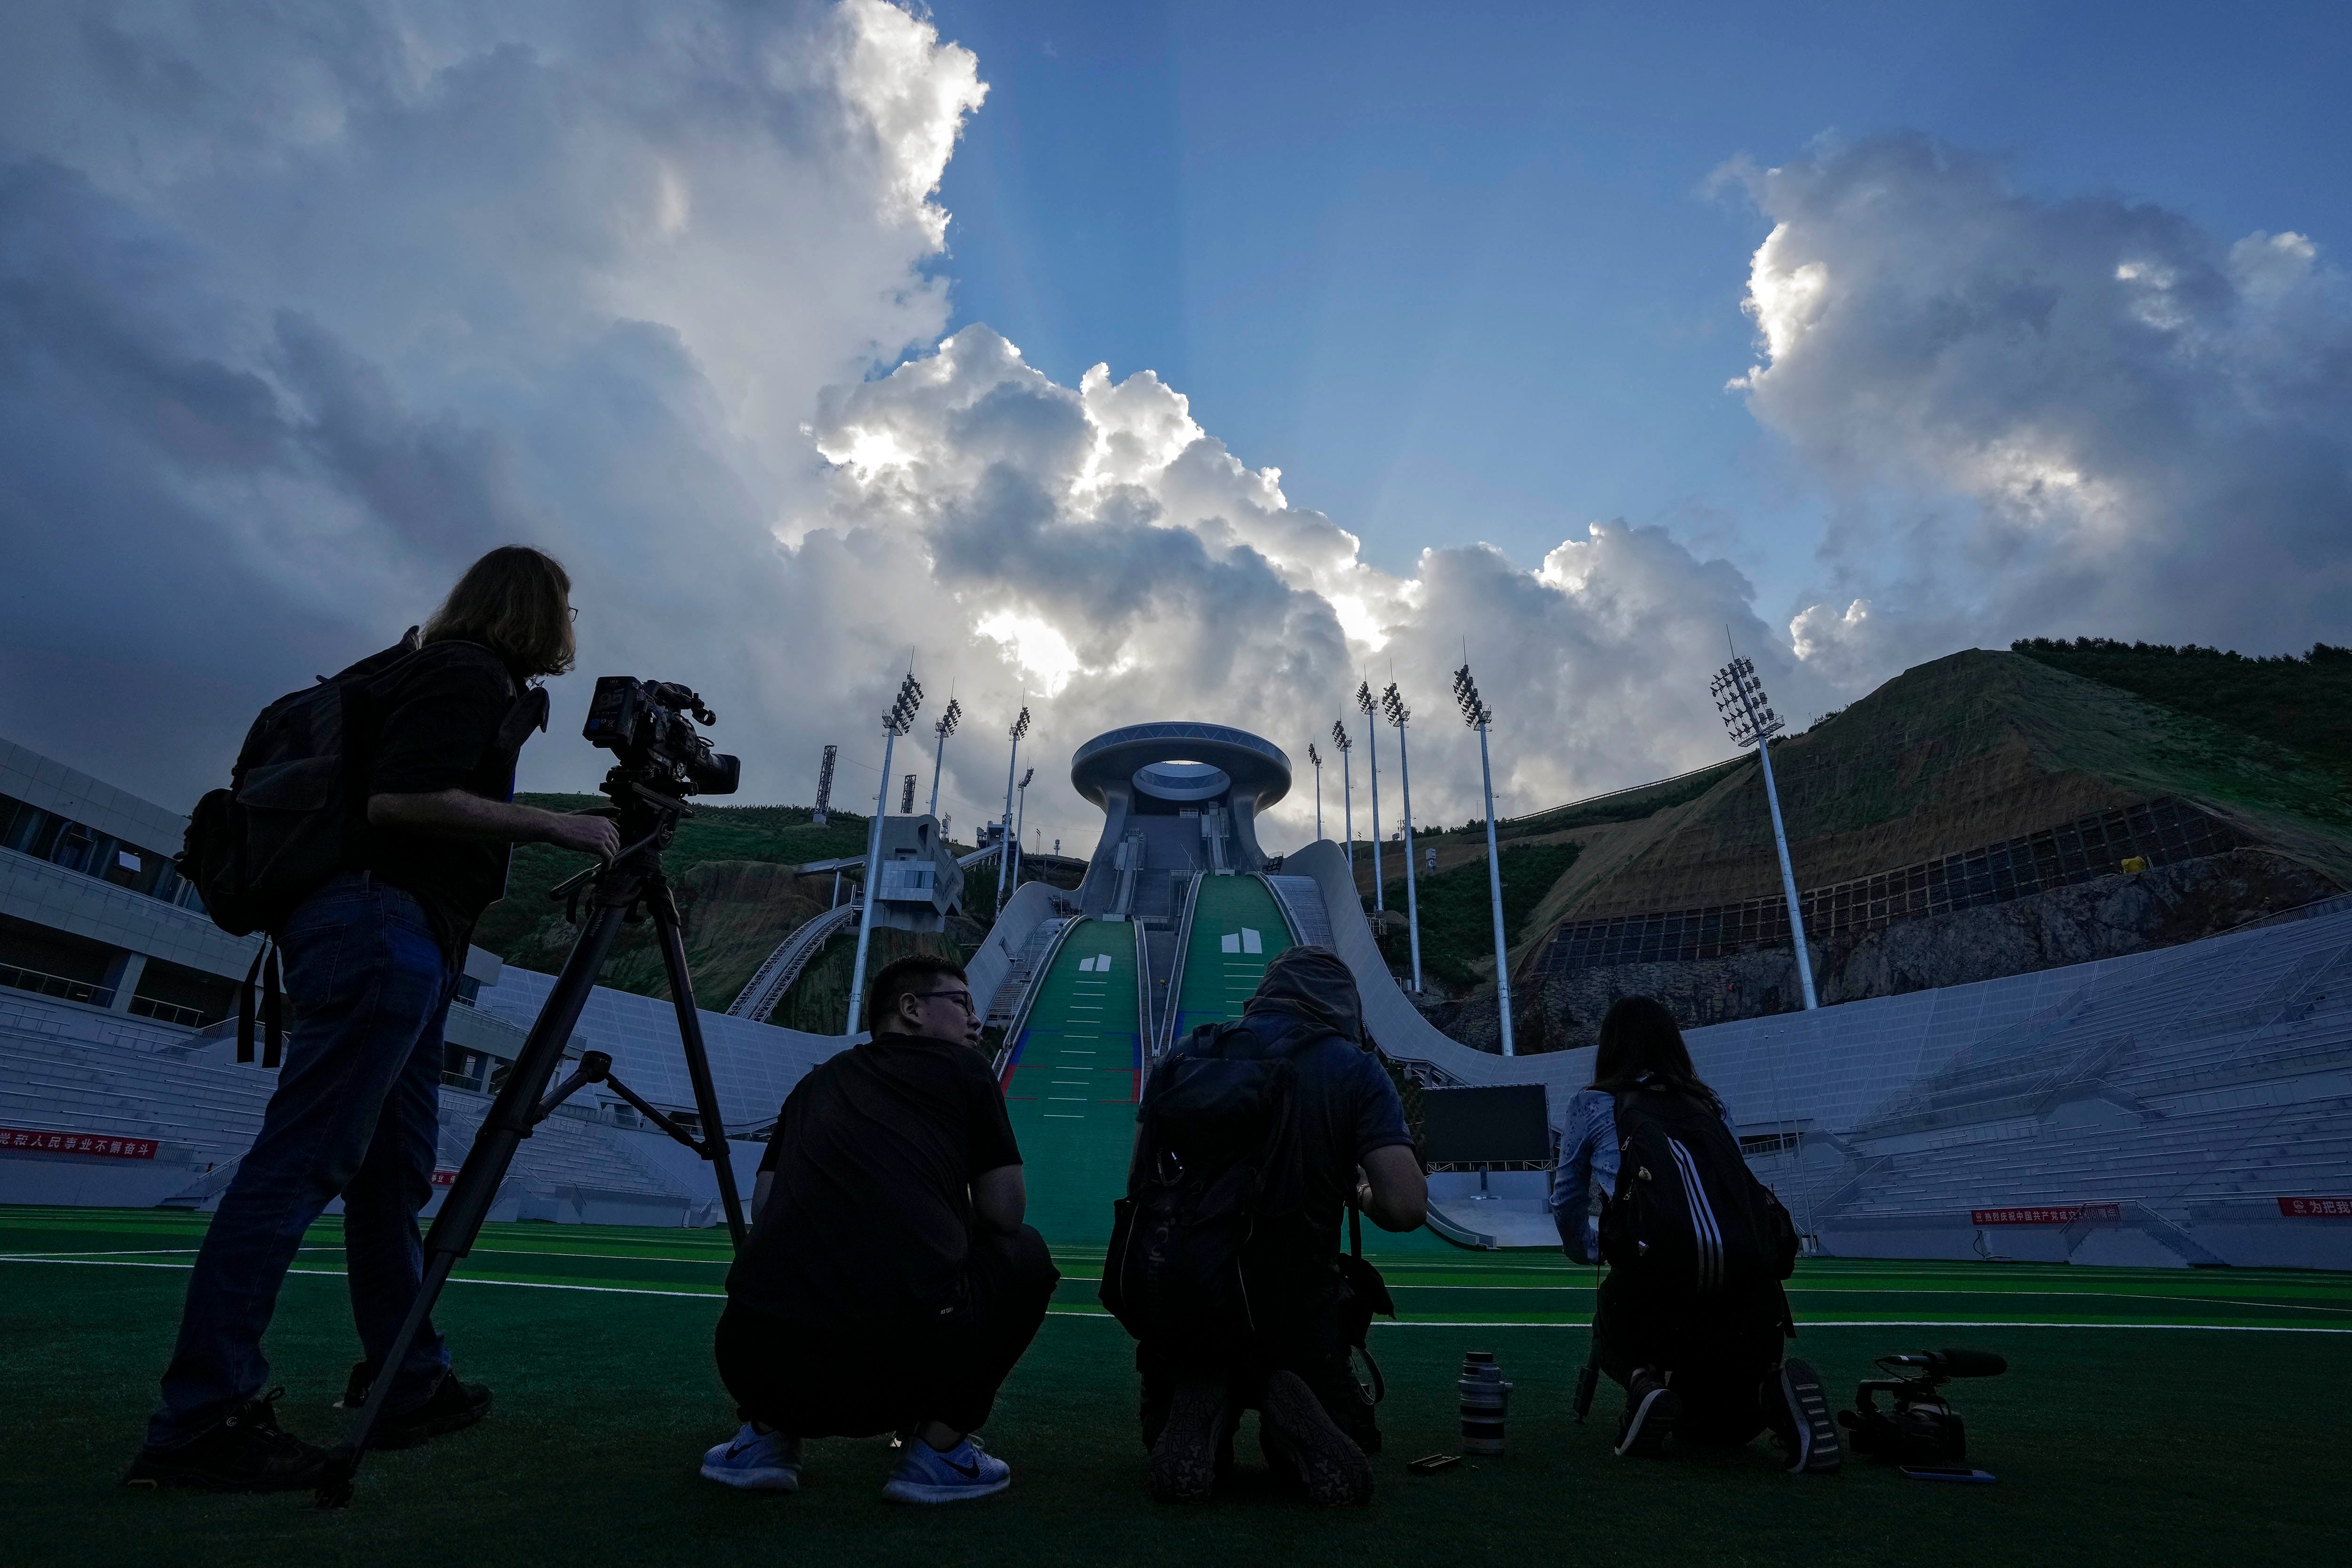 People with camera equipment standing in front of a venue for ski jumping